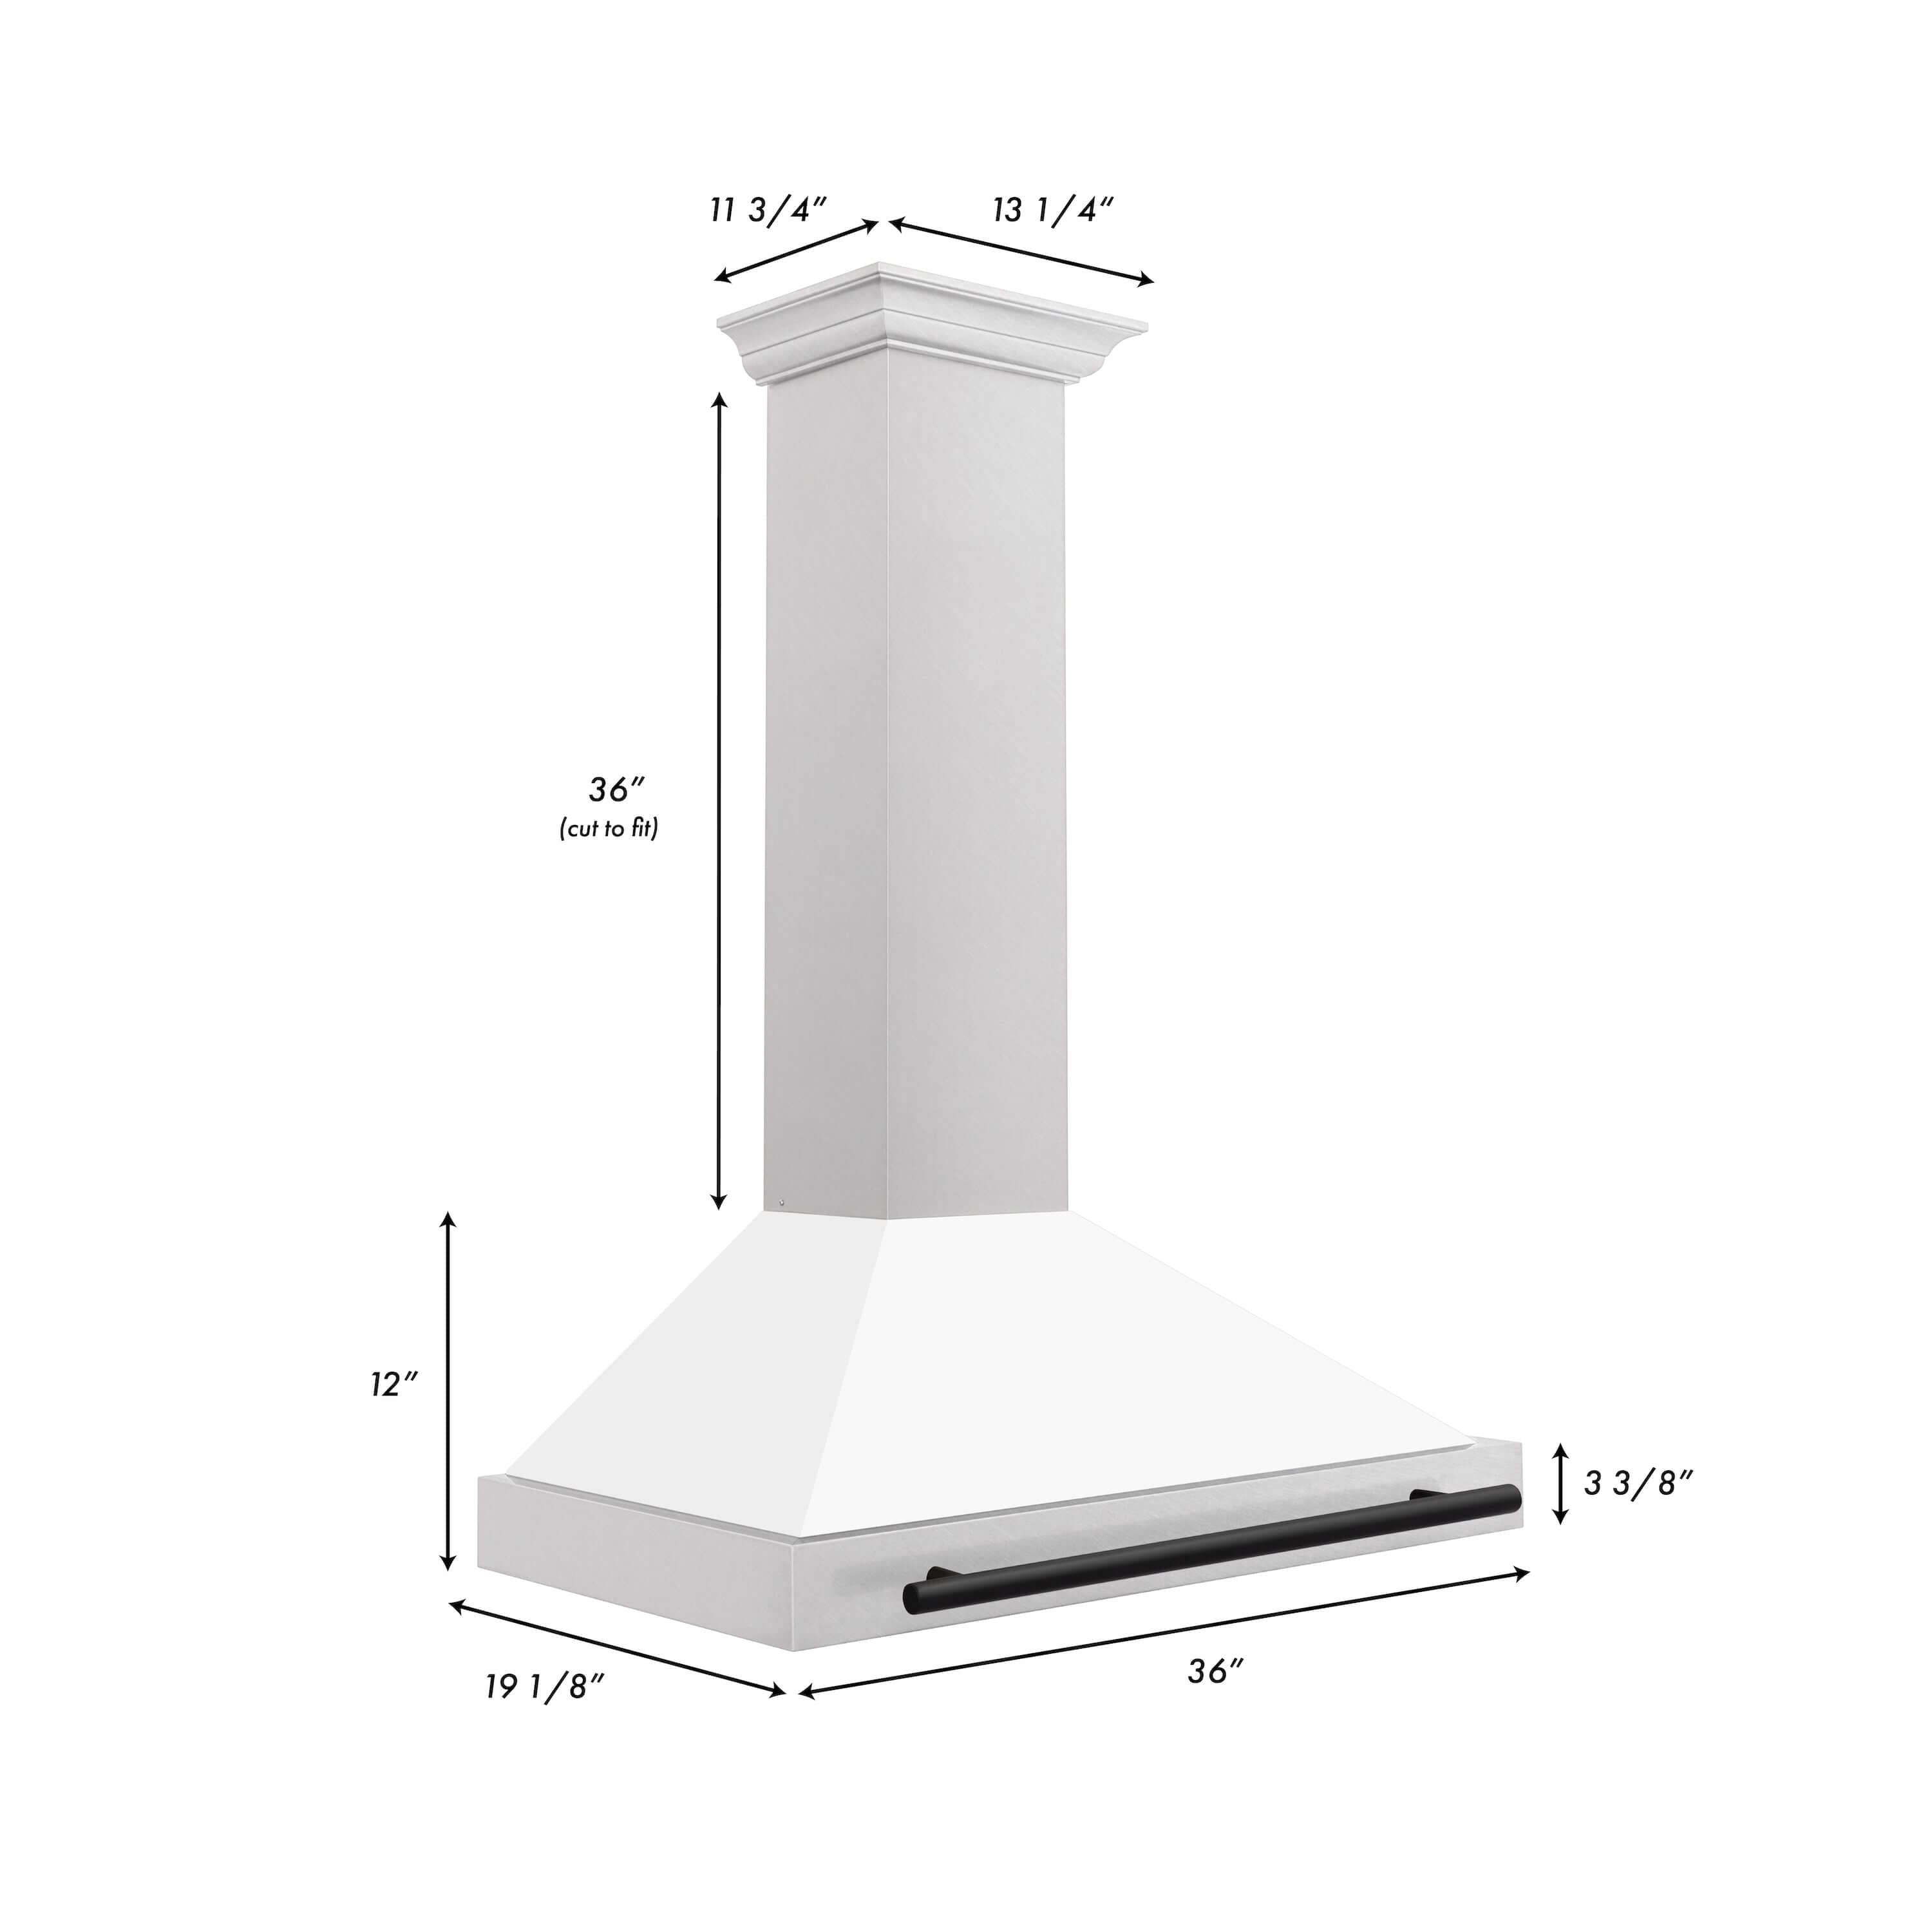 ZLINE Autograph Edition 36 in. Range Hood in Fingerprint Resistant Stainless Steel with White Matte Shell and Accented Handle (KB4SNZ-WM36) dimensional diagram and measurements.